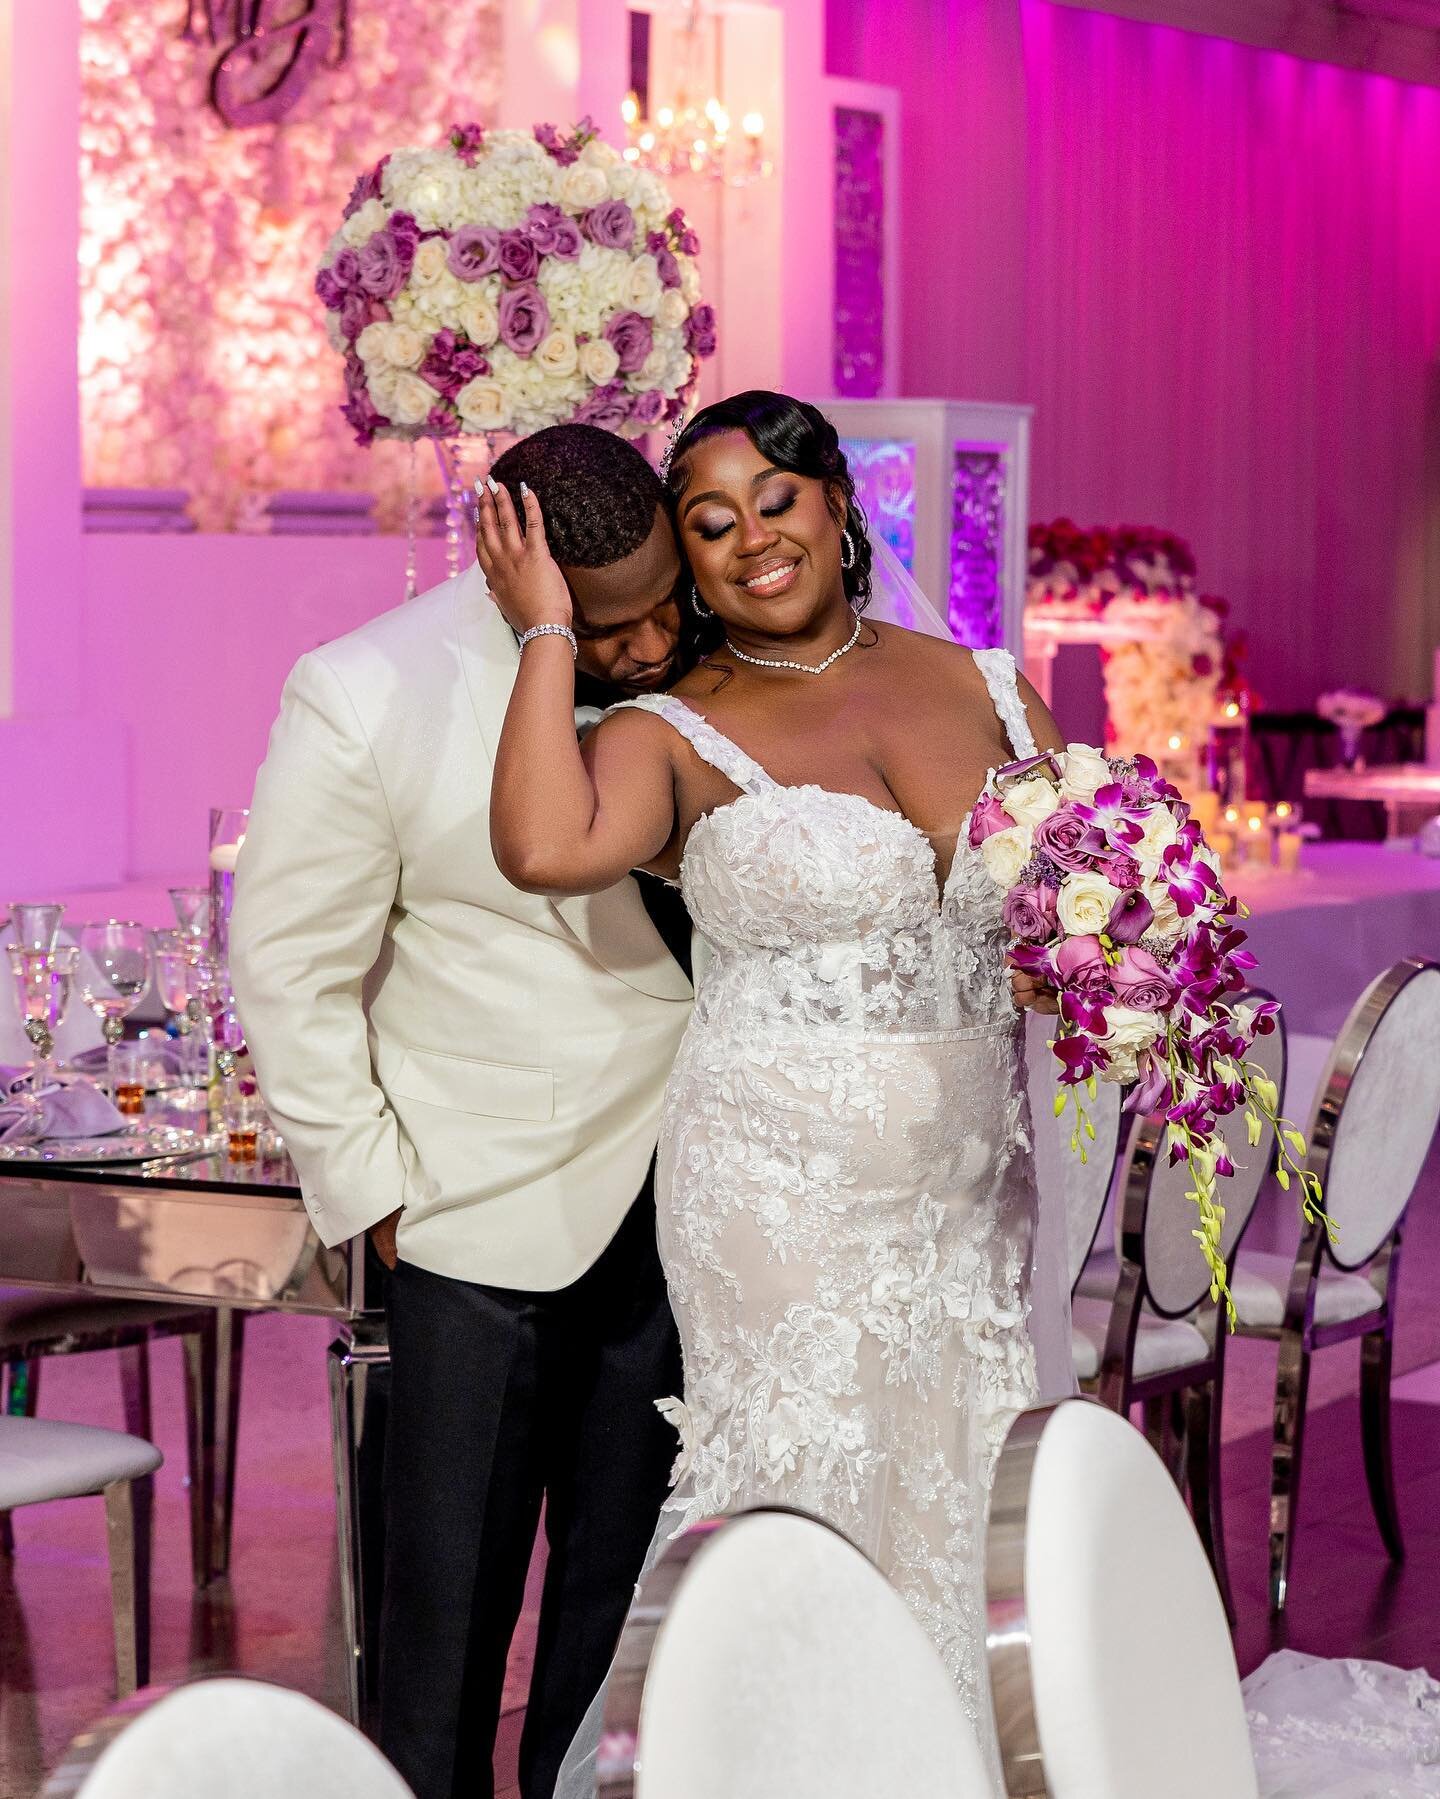 Blessings to the newlyweds Milissa &amp; Joe, they really turnt up the party! I captured some of the most beautiful portraits of their love story on their wedding day✨!
&bull;
Photographer: @justbashton 
Video: @unleashedvizuals 
Clients: @delightnes